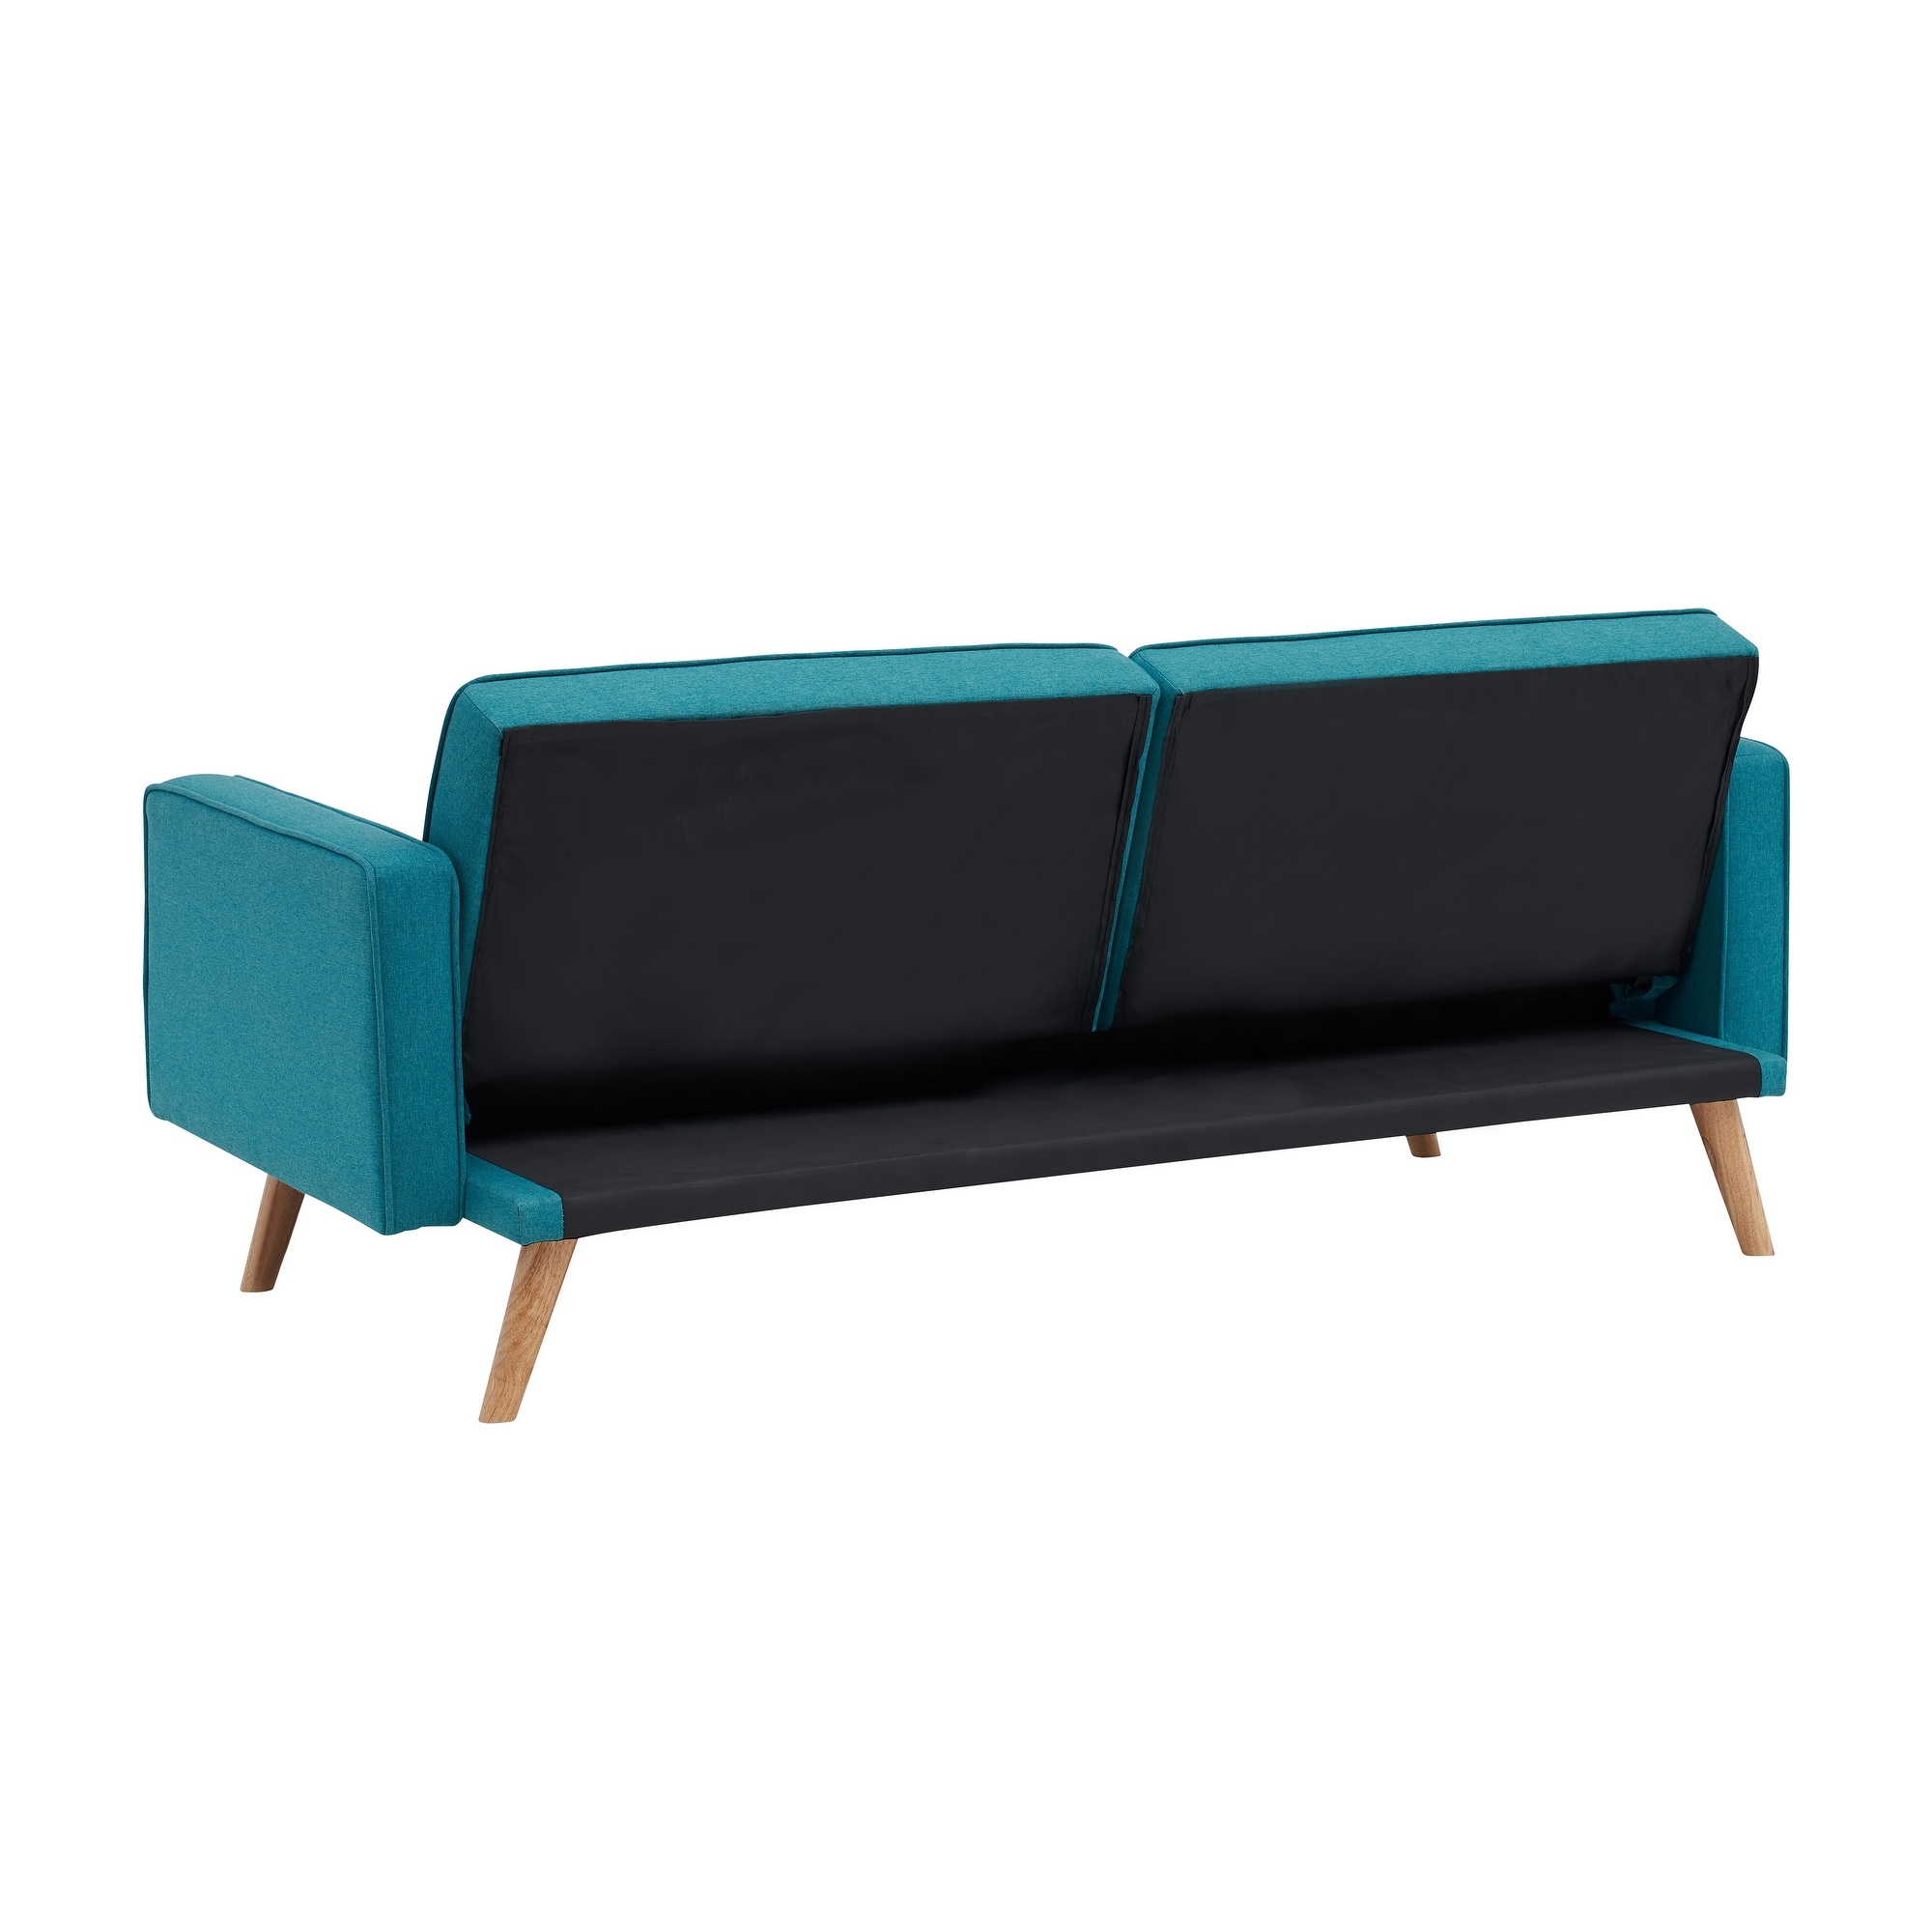 Modern 72.4" Convertible Double Folding Living Room Sofa Bed - Blue